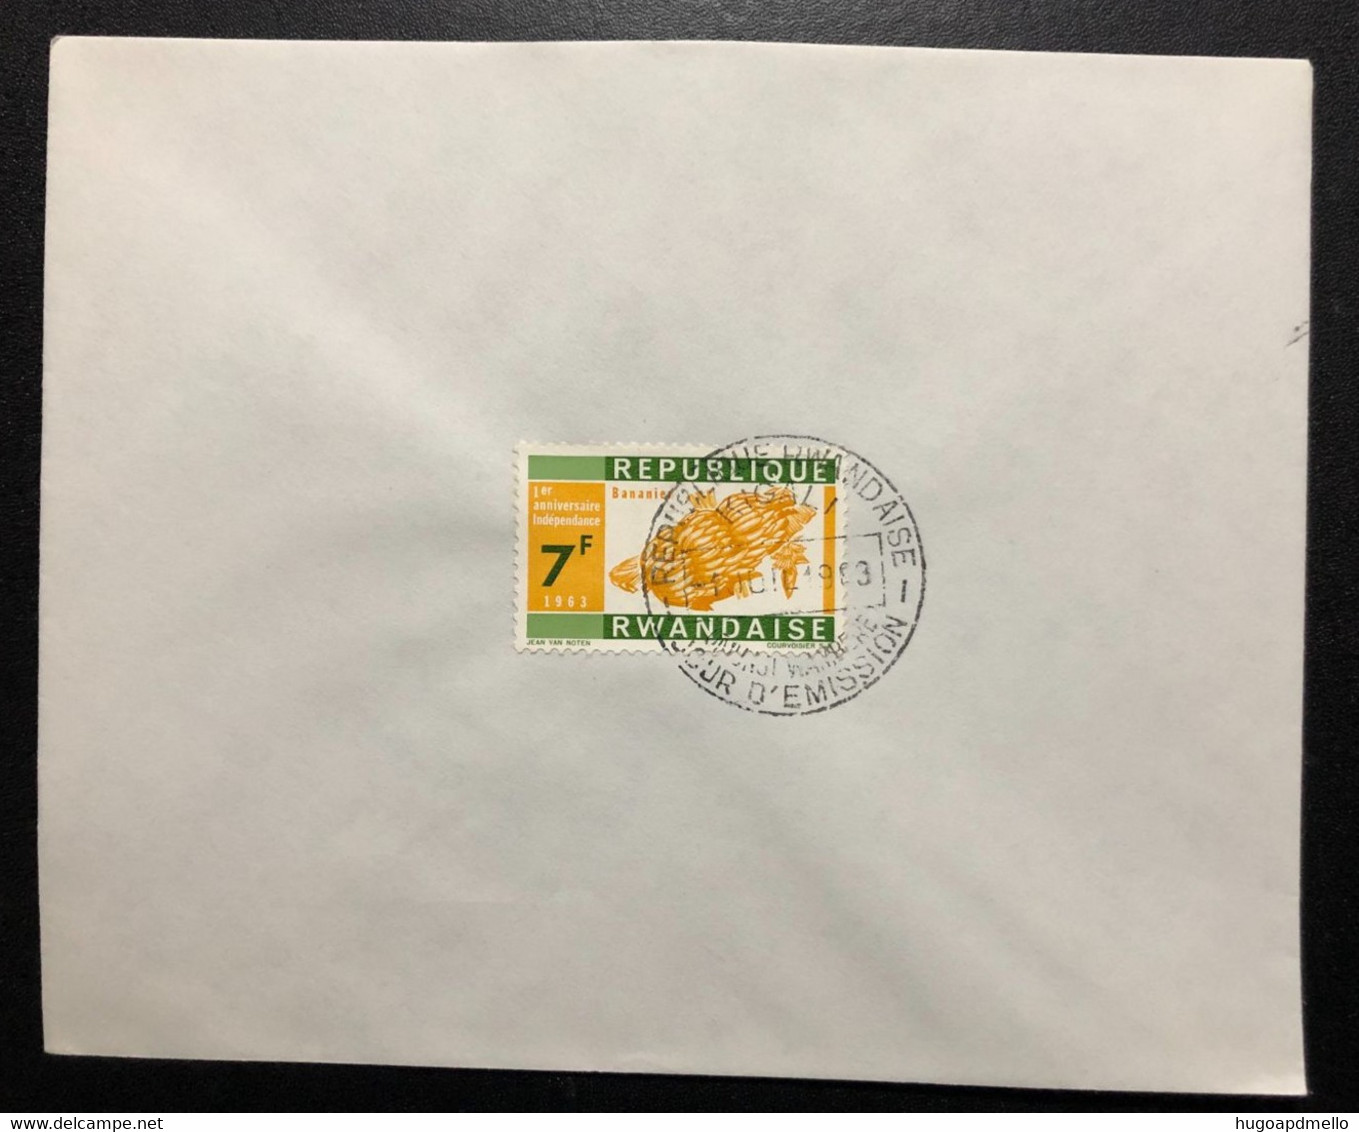 RWANDA, Uncirculated FDC, « 1er Anniversaire INDEPENDENCE », « INDEPENDENCE 1st Anniversary », 1963 - 1962-1969